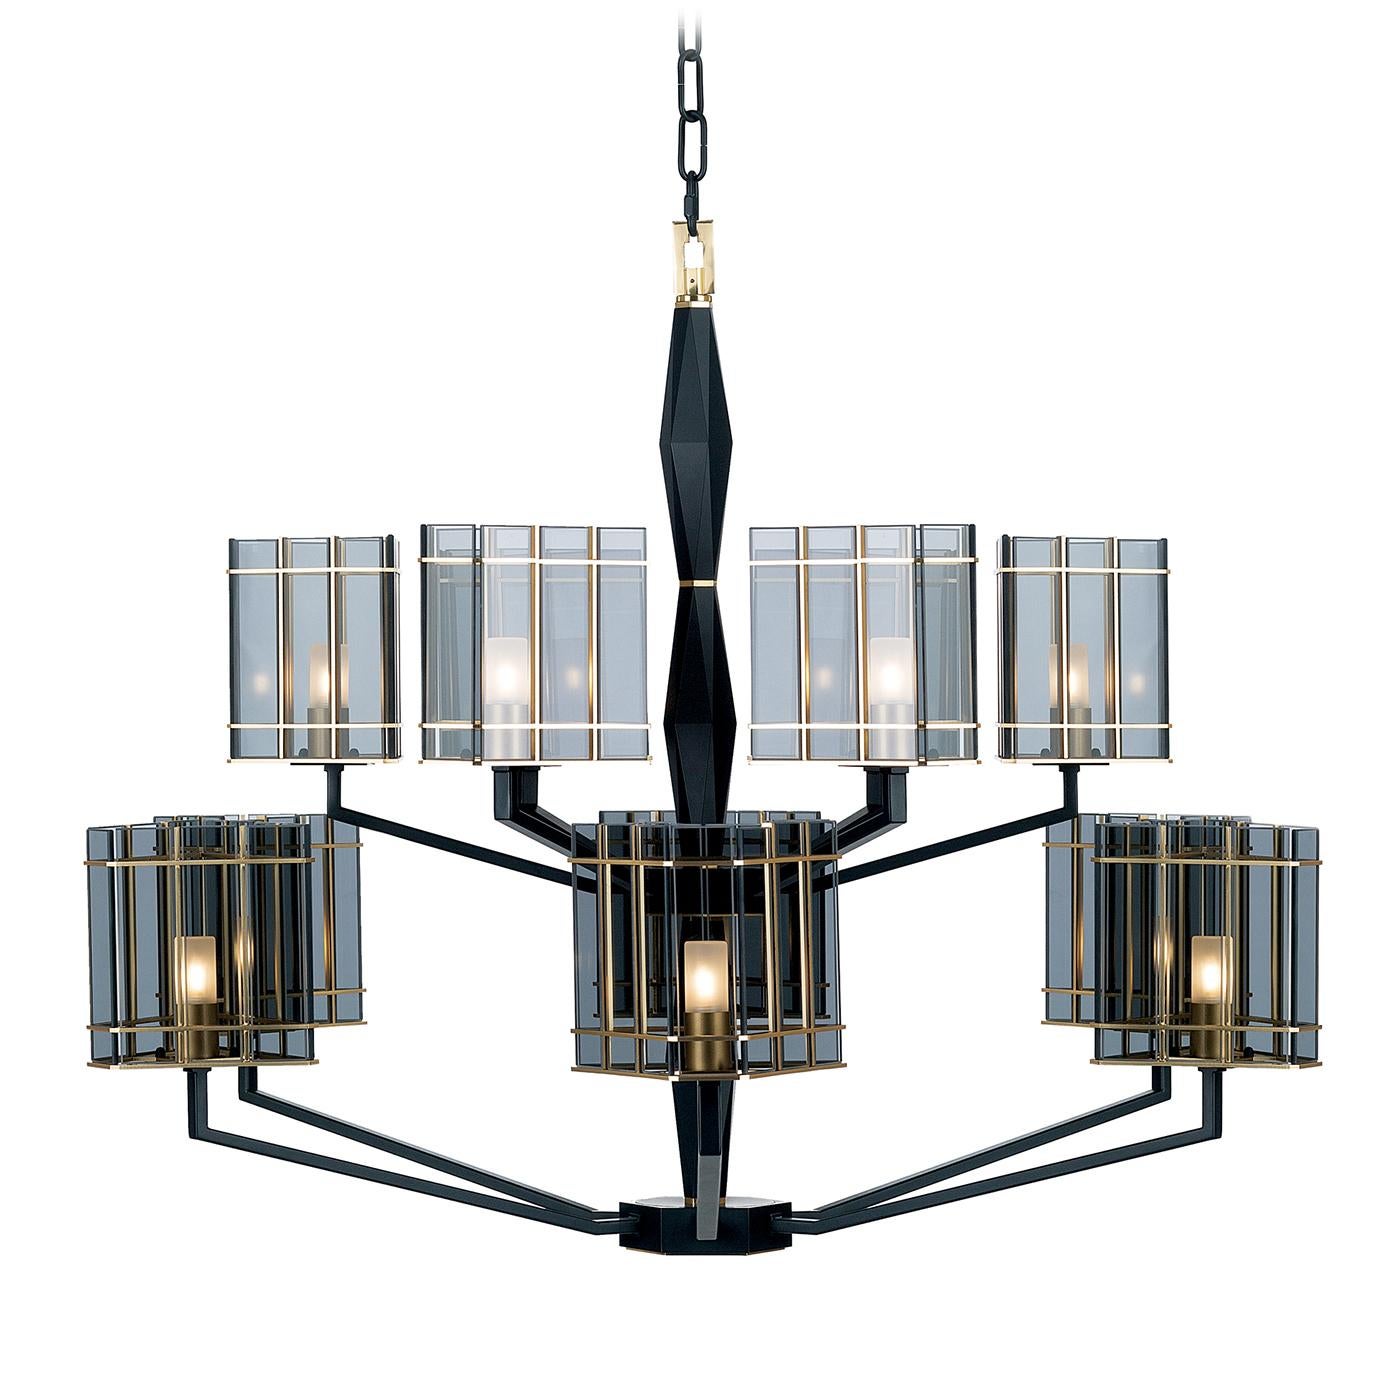 Part of the Top Glass collection, this striking chandelier features a chic art deco design that will be a timeless and sophisticated addition into any decor. Its metal structure has a black, matte finish and comprises a vertical element and two